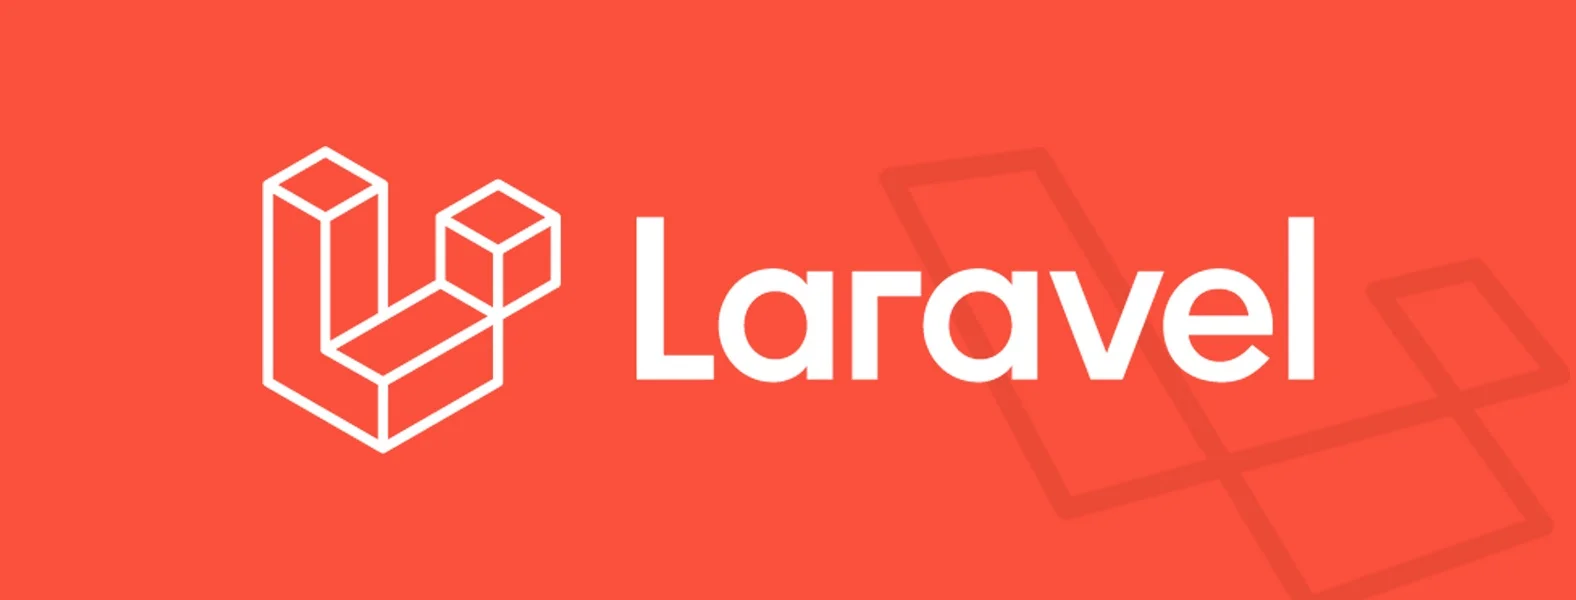 Follow Laravel Naming conventions - Laravel Best Practices cover image